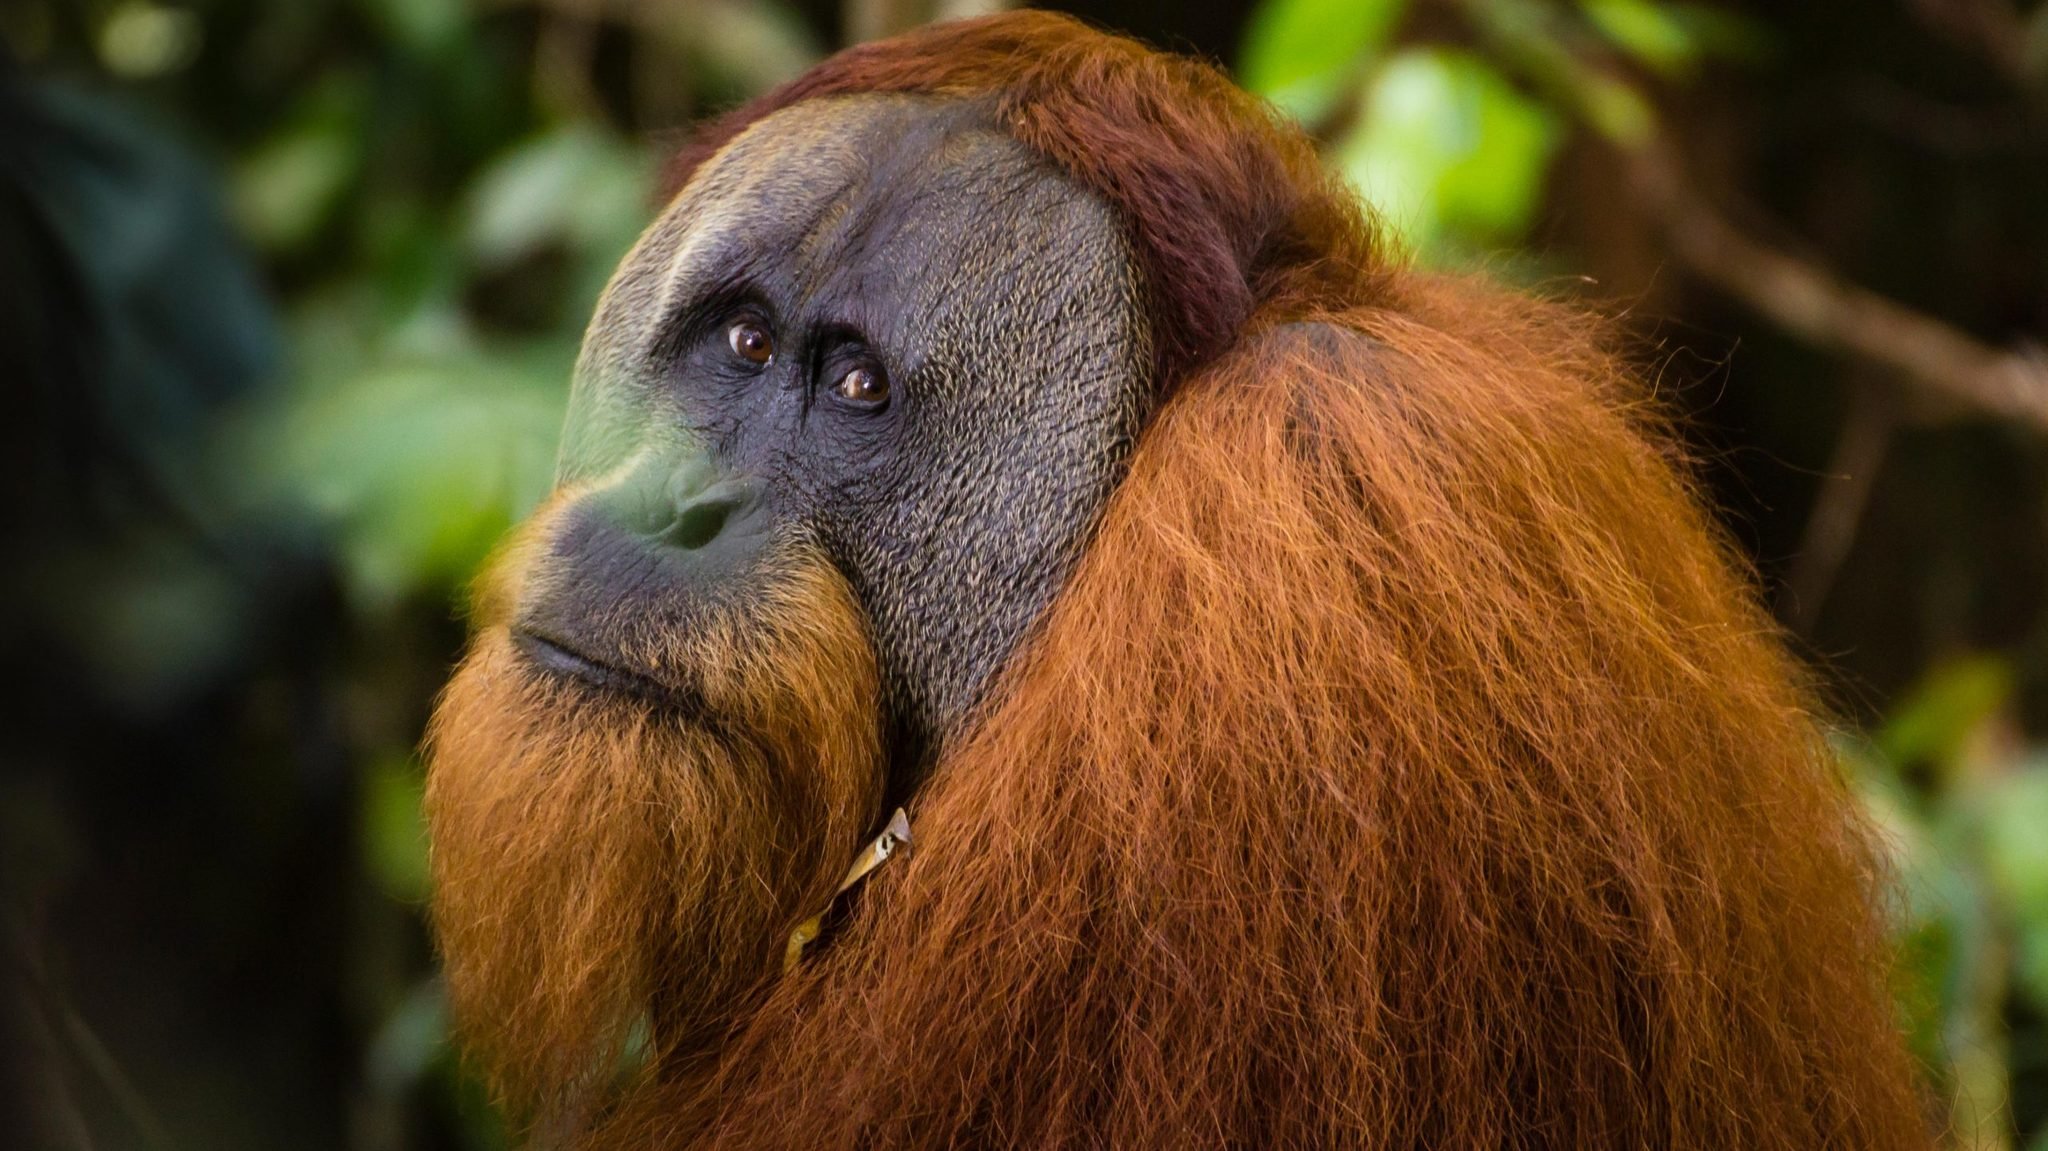 How Many Orangutans Are Left in the World? Reader's Digest